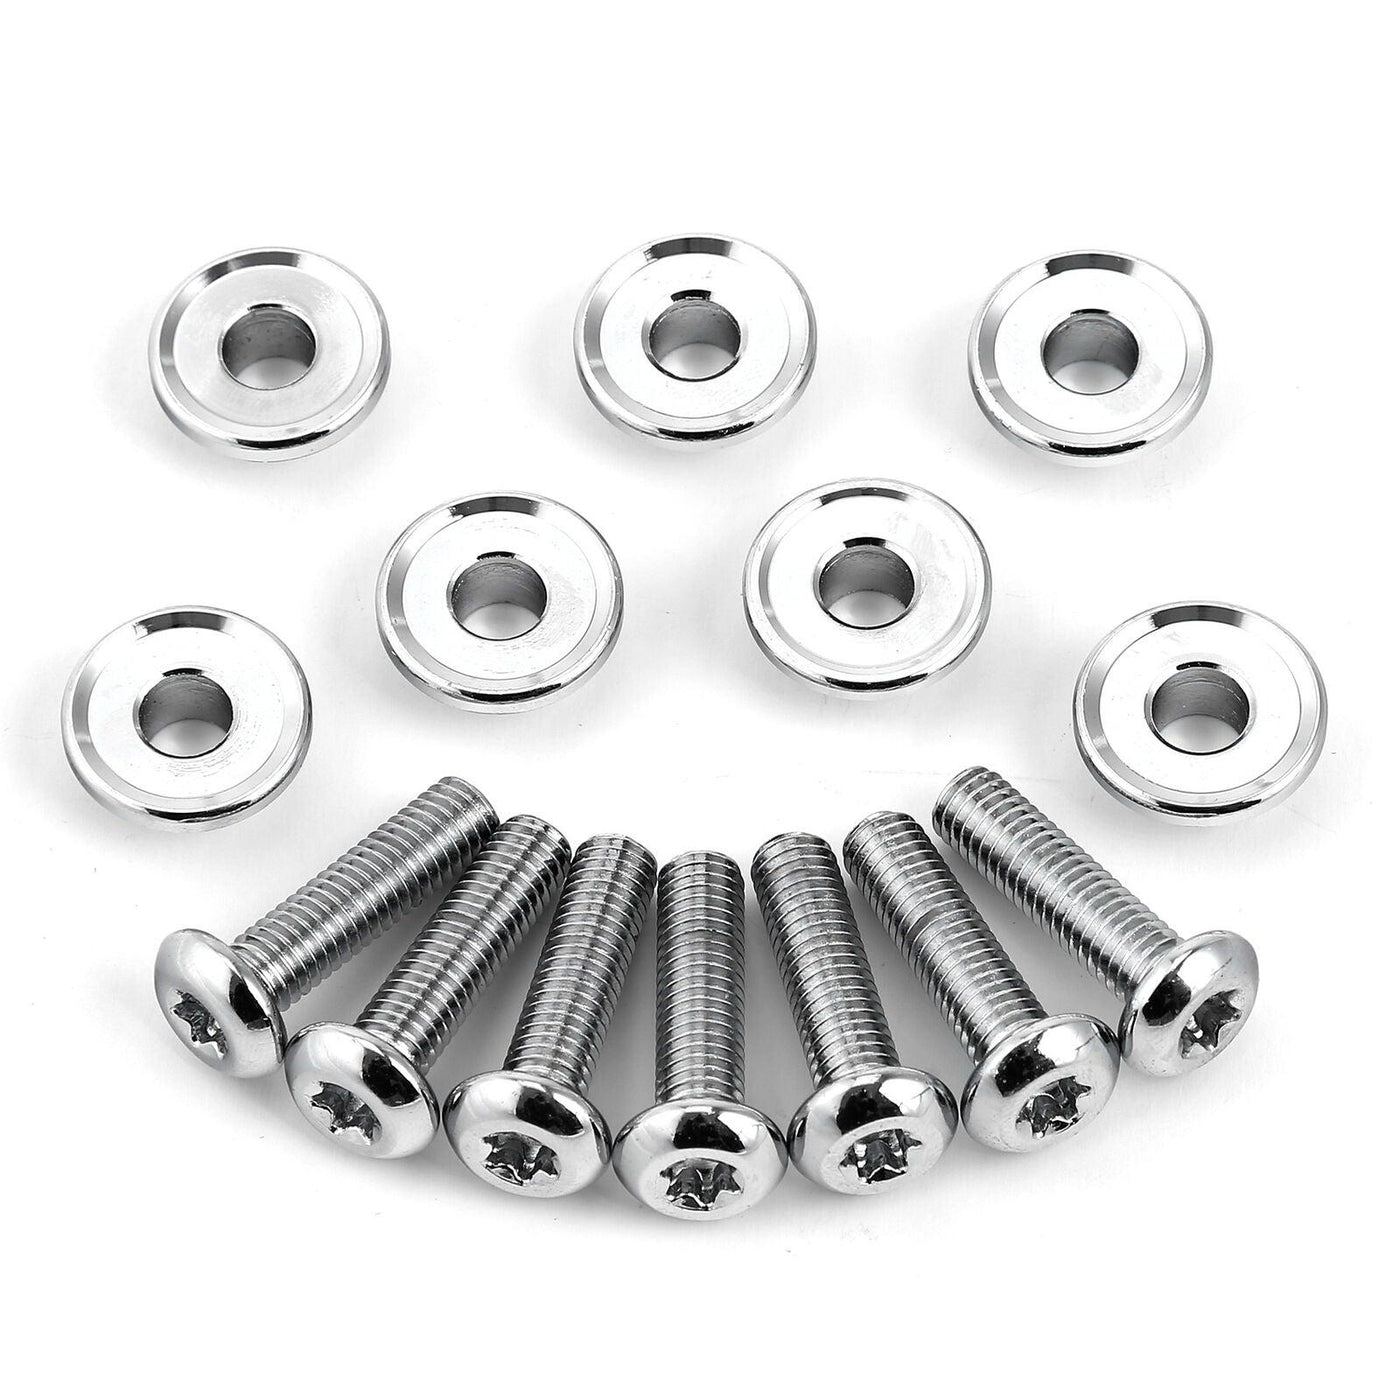 Rear Disk Brake Rotor Bolts Fit For Harley Electra Street Road Glide King 09-21 - Moto Life Products